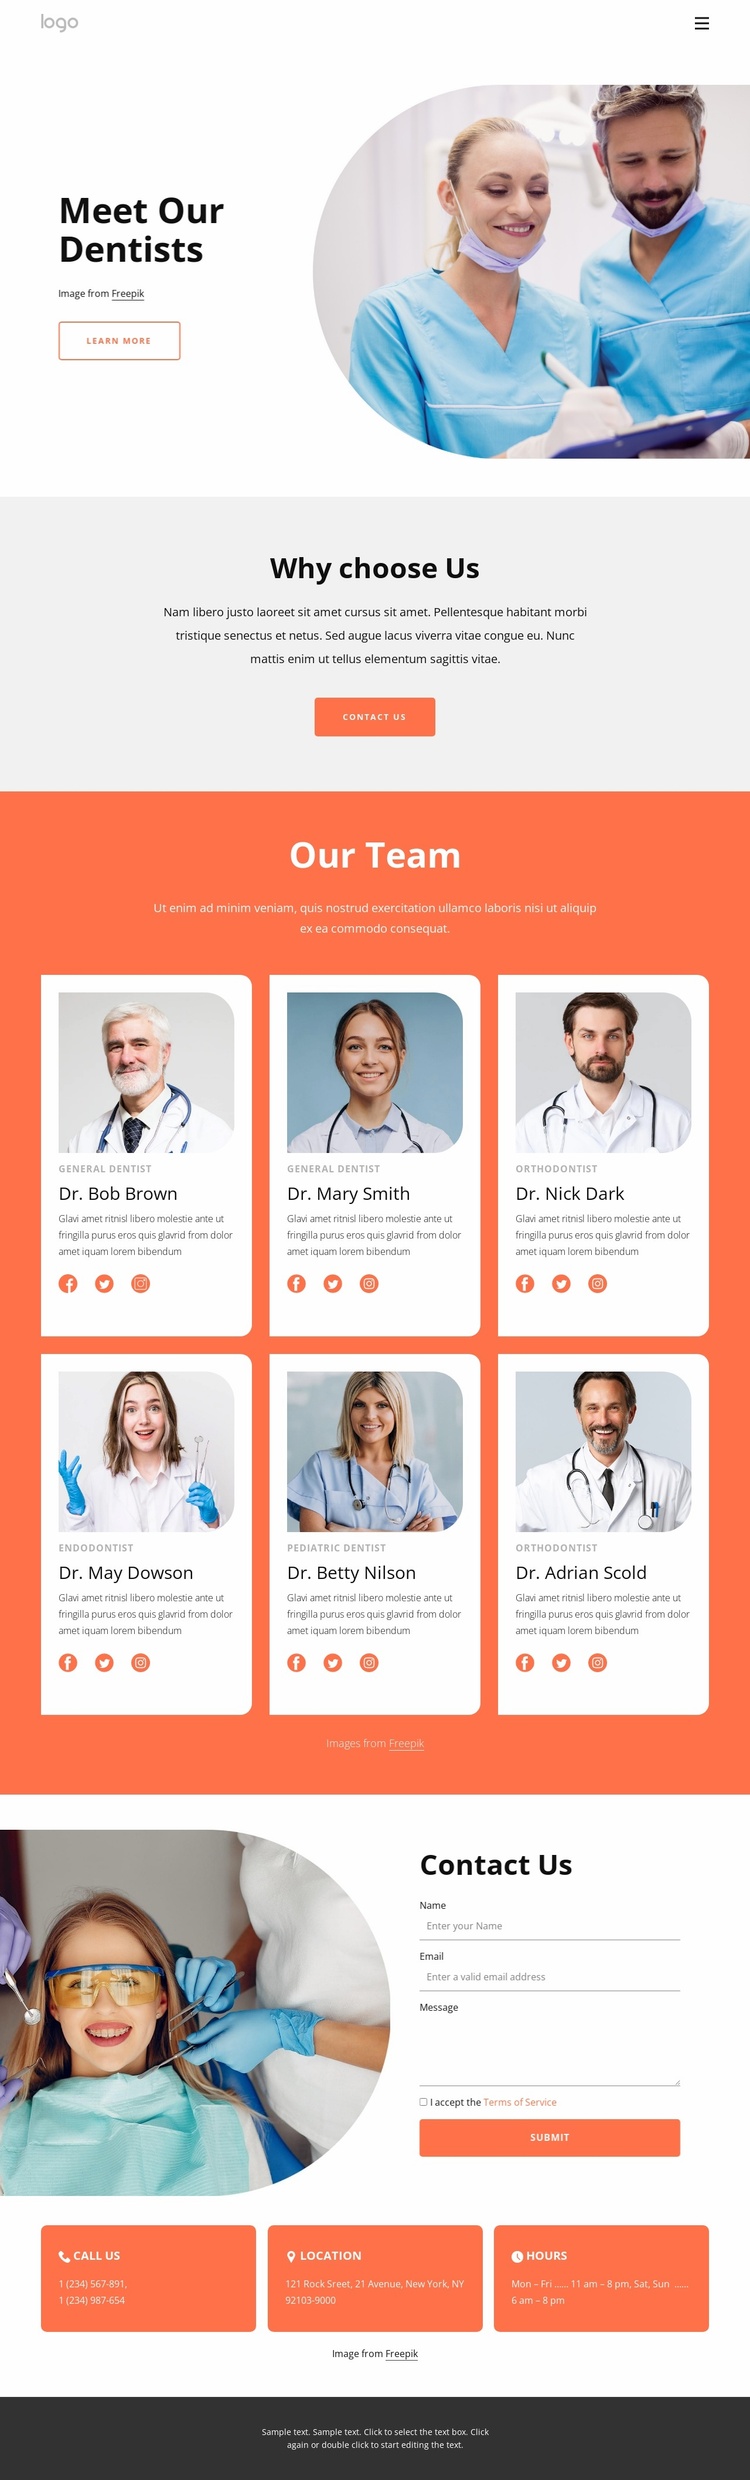 Highly-qualified dentists Landing Page